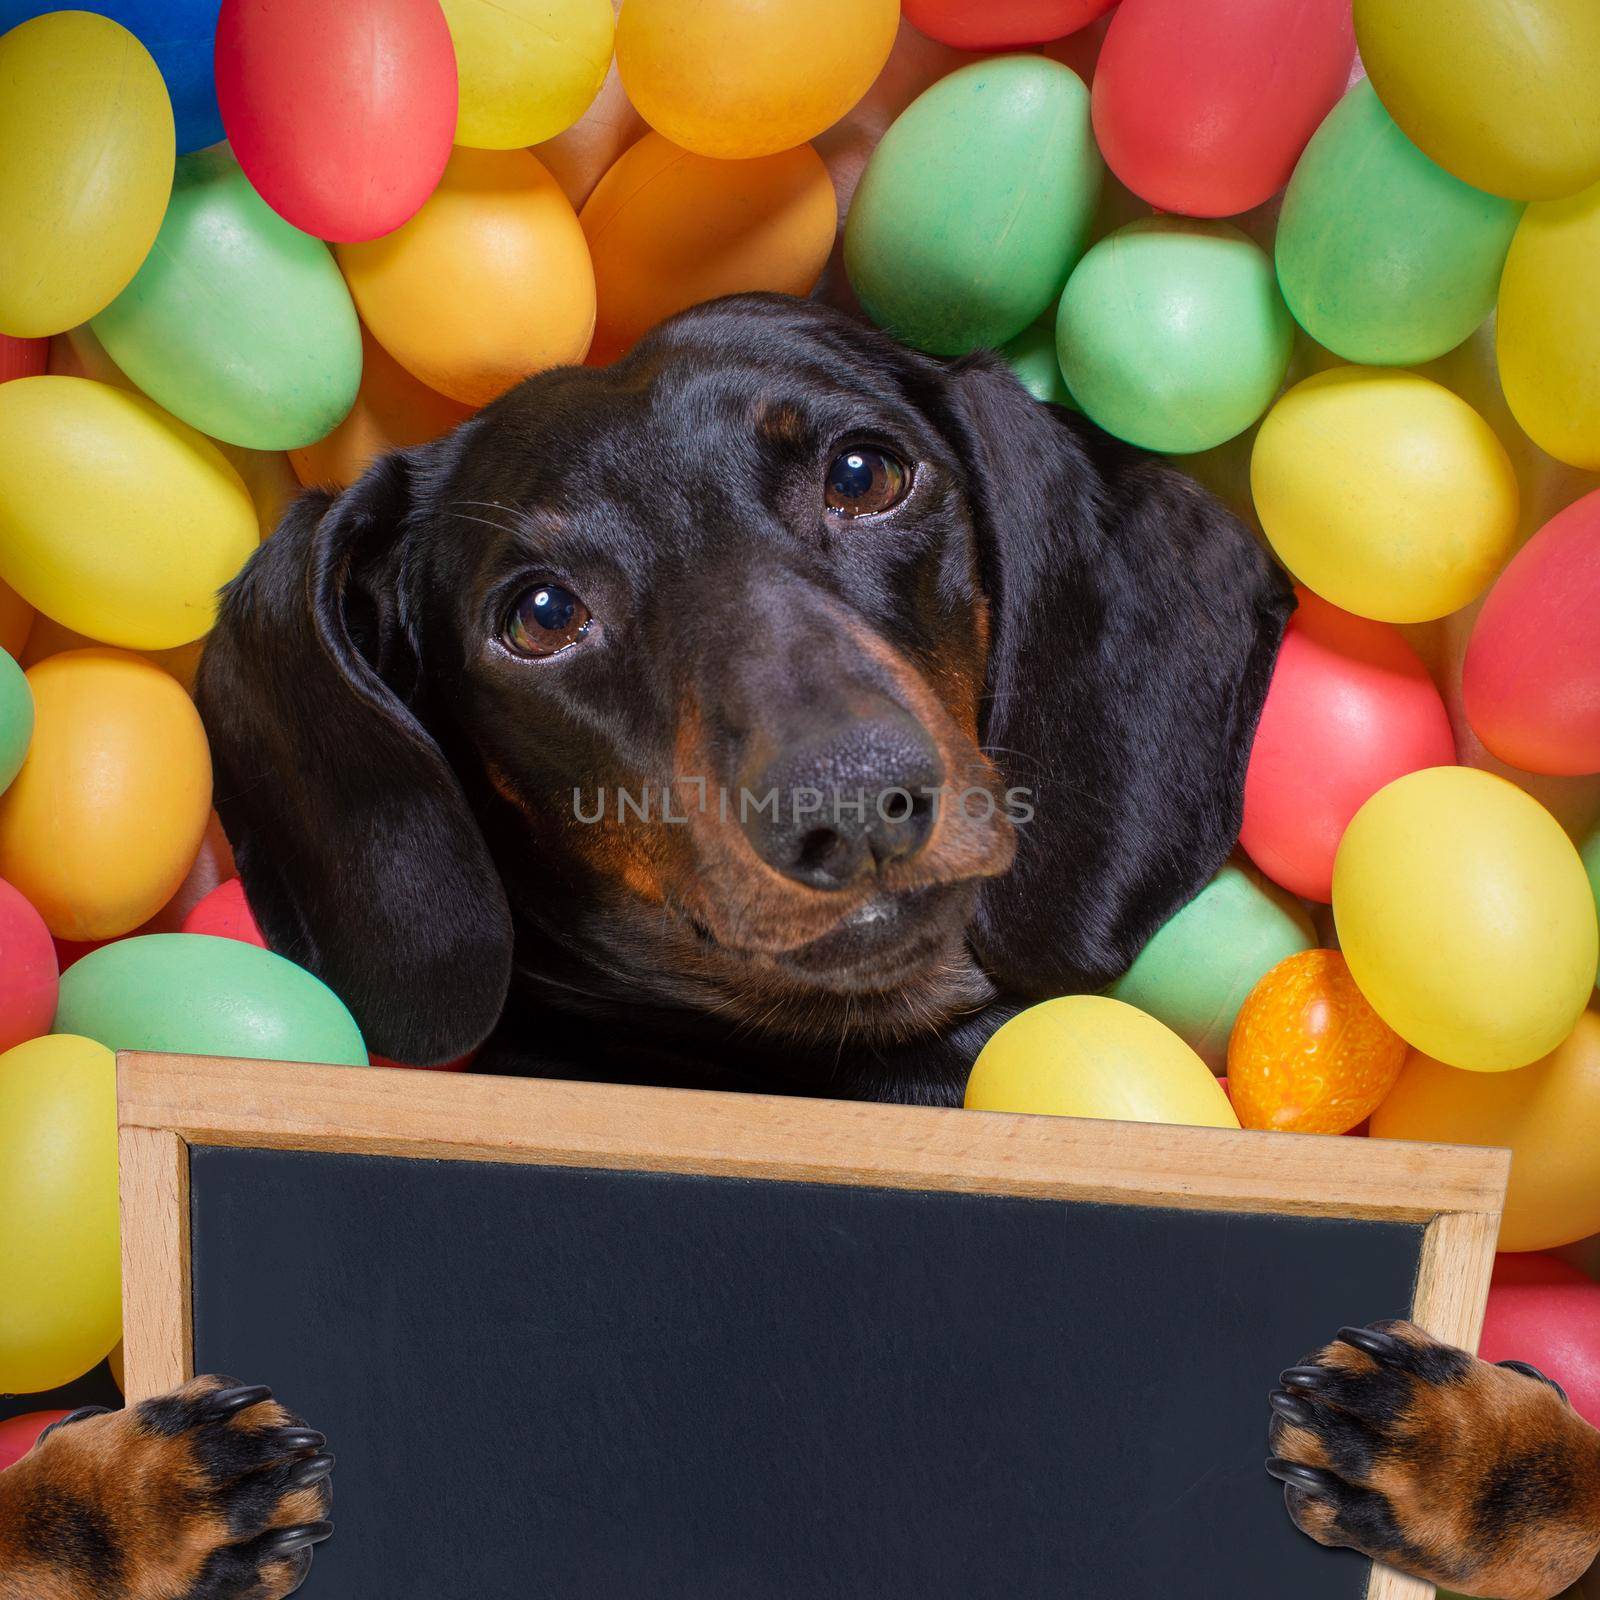 happy easter  dachshund sausage  dog lying in bed full of funny colourful eggs ,  for the holiday season, holding a placard or banner